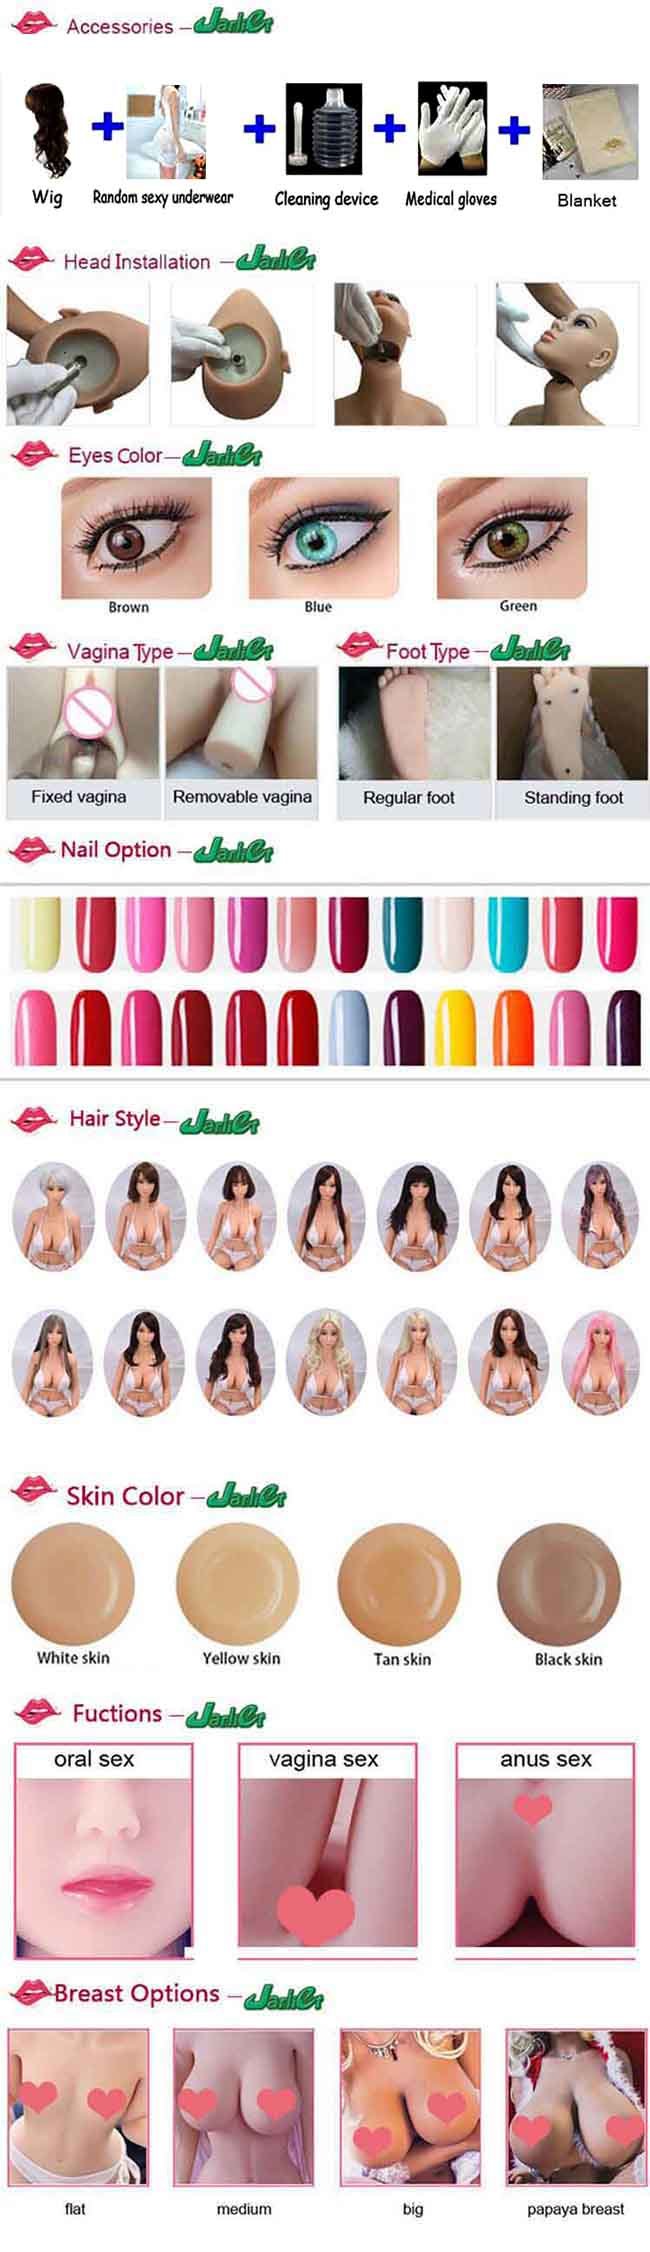 Shenzhen Suppliers Silicone Adult Product Oral Anal Vaginal Sex Dolls